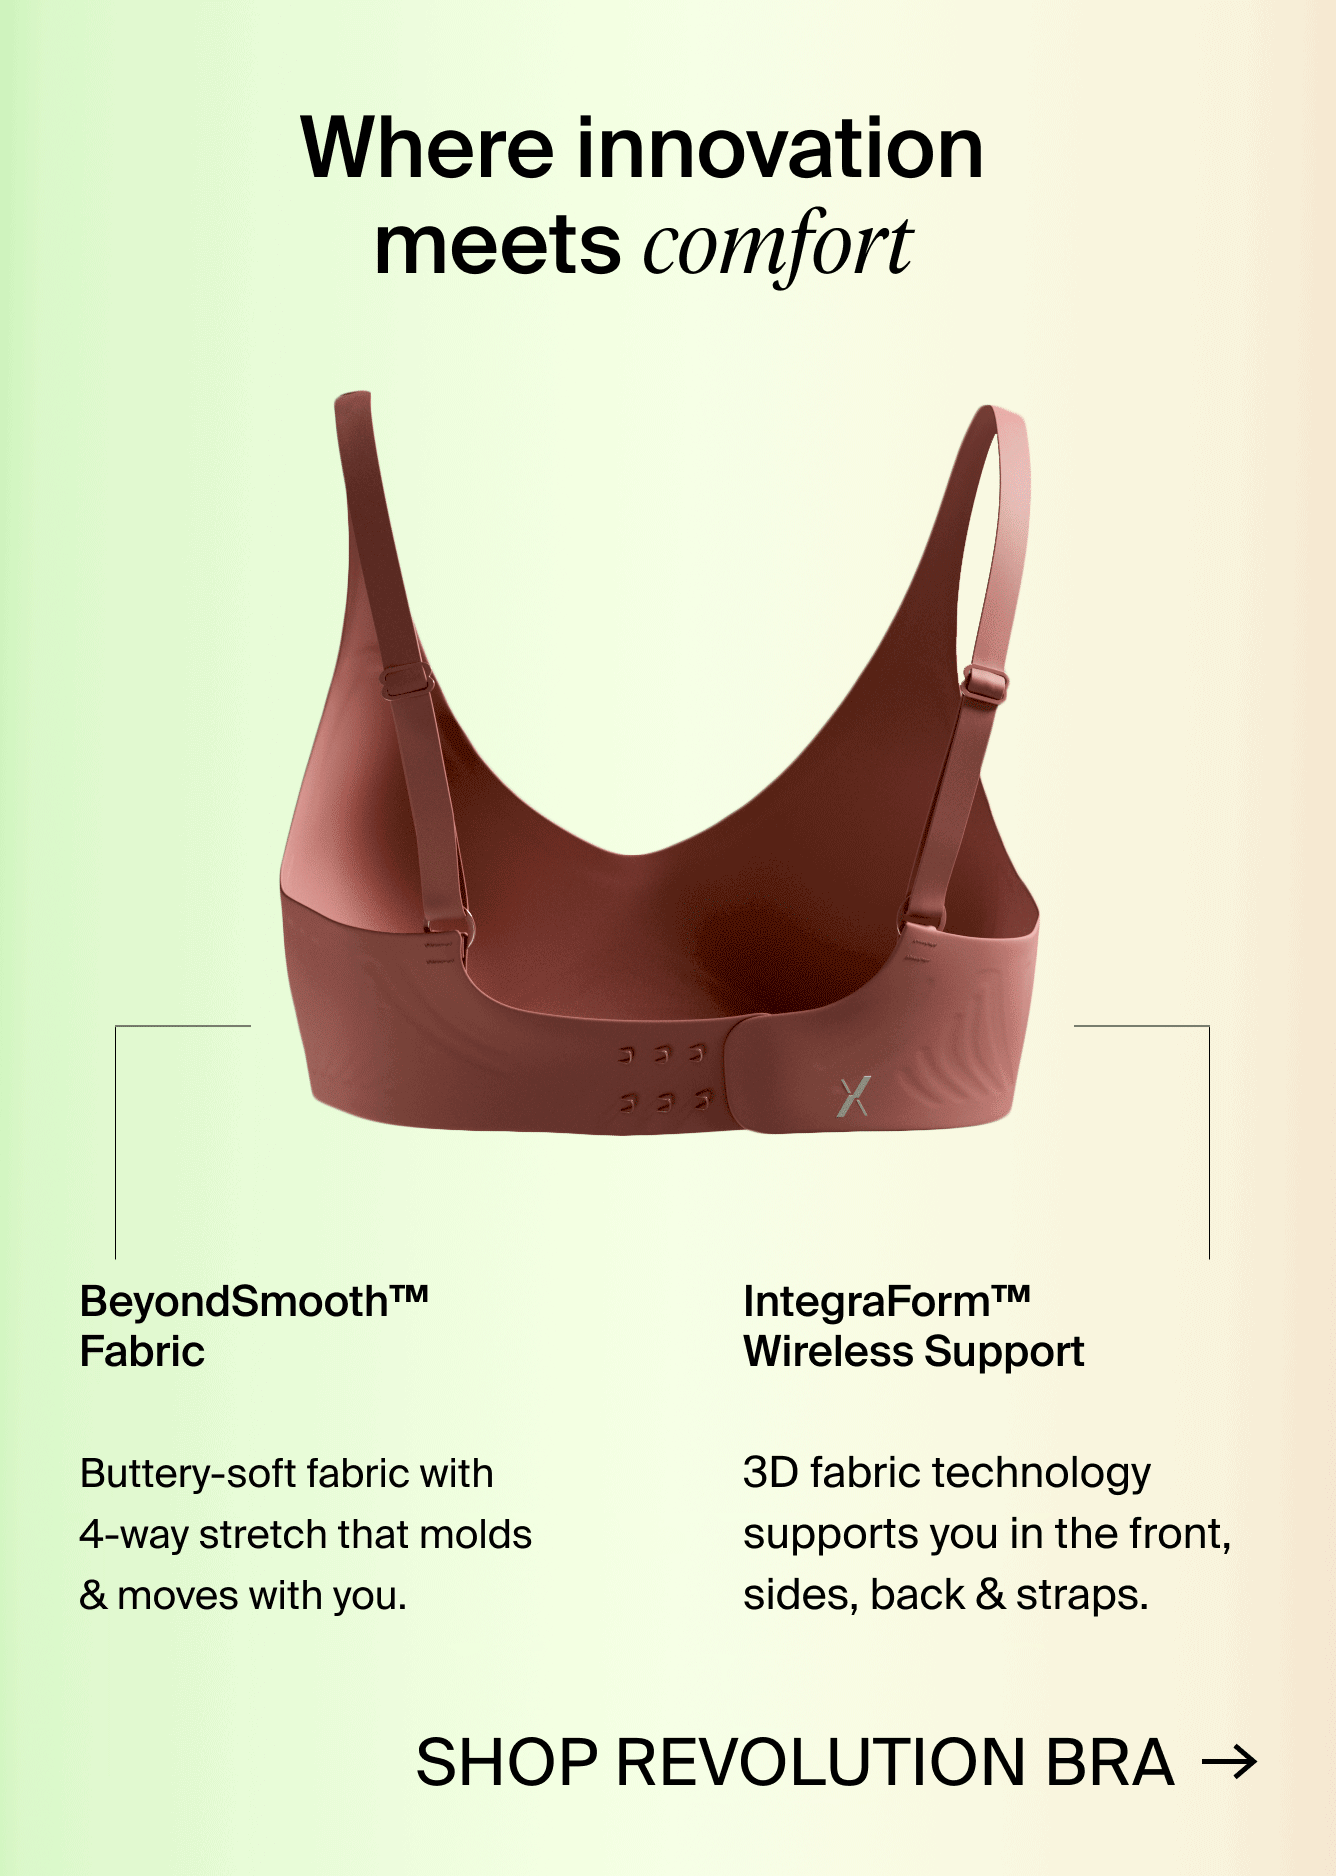 Knix: Have you met the Revolution Bra?